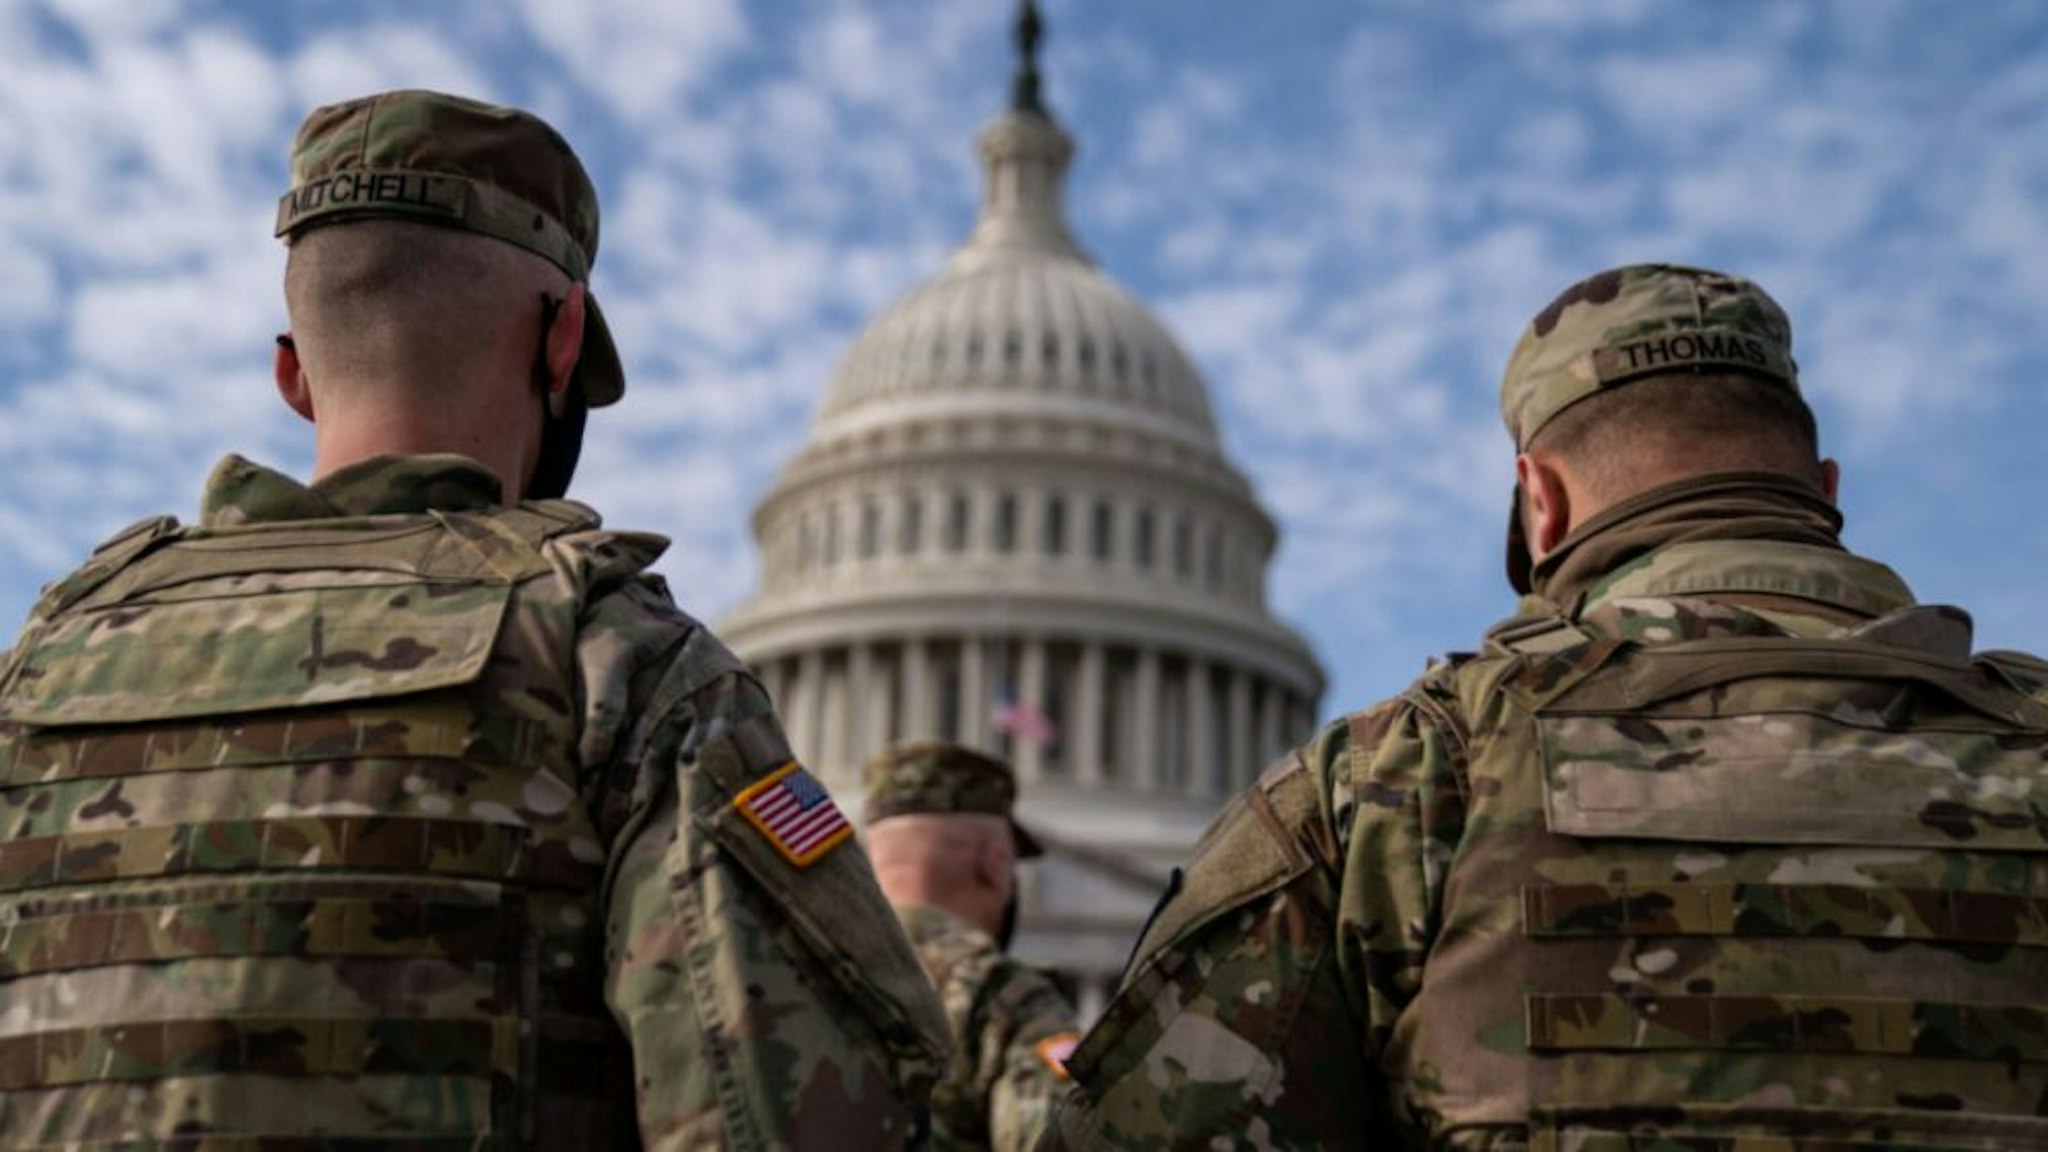 Members of the National Guard in the plaza in front of the U.S. Capitol Building on Sunday, Jan. 17, 2021 in Washington, DC.